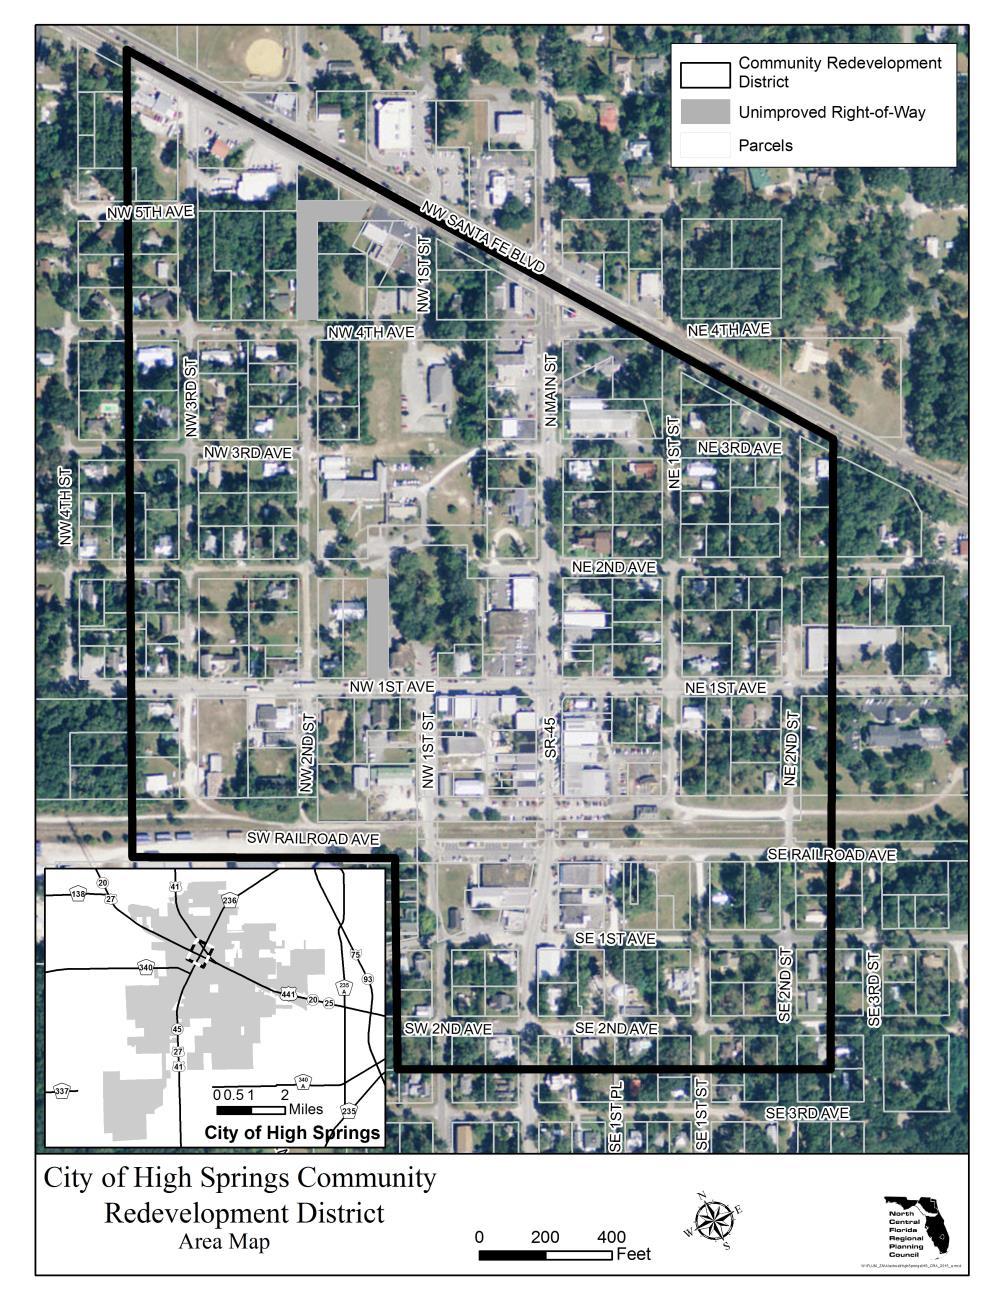 Boundaries of the Redevelopment District Figure 1 presents the aerial view of the boundaries of the existing High Springs Community Redevelopment District.